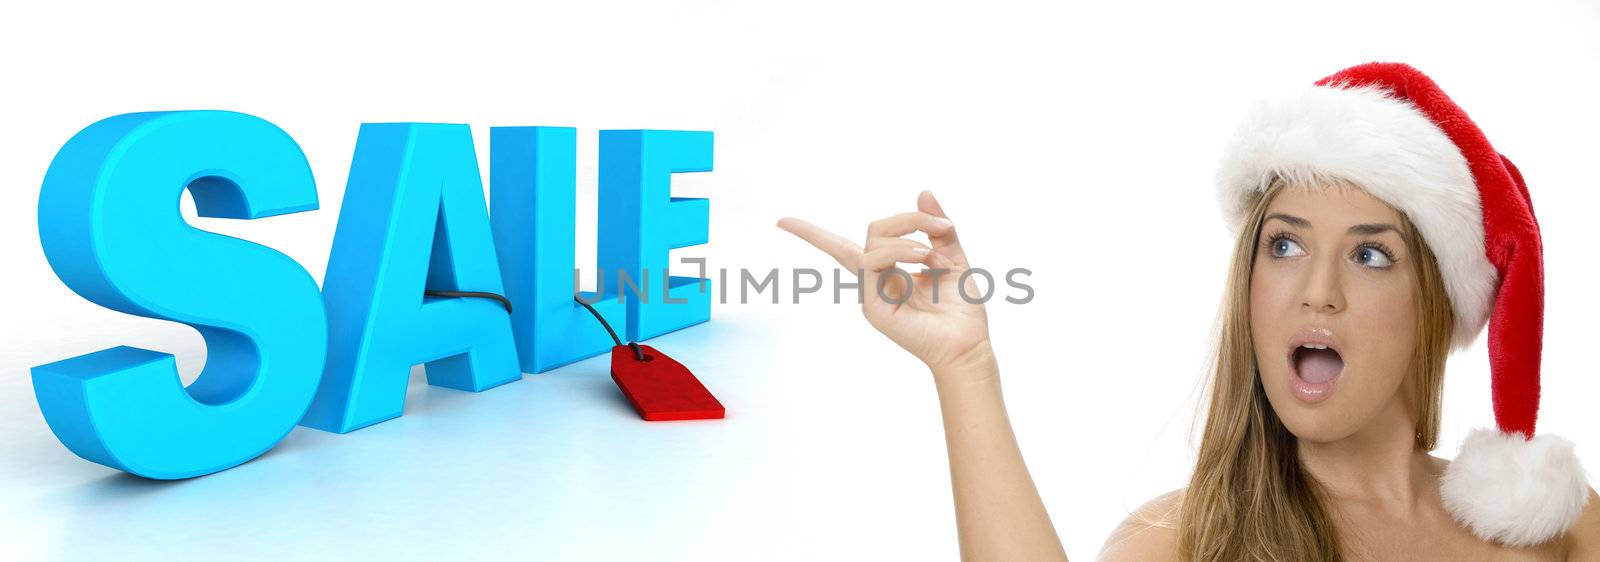 sexy lady pointing to sale 3d text by imagerymajestic